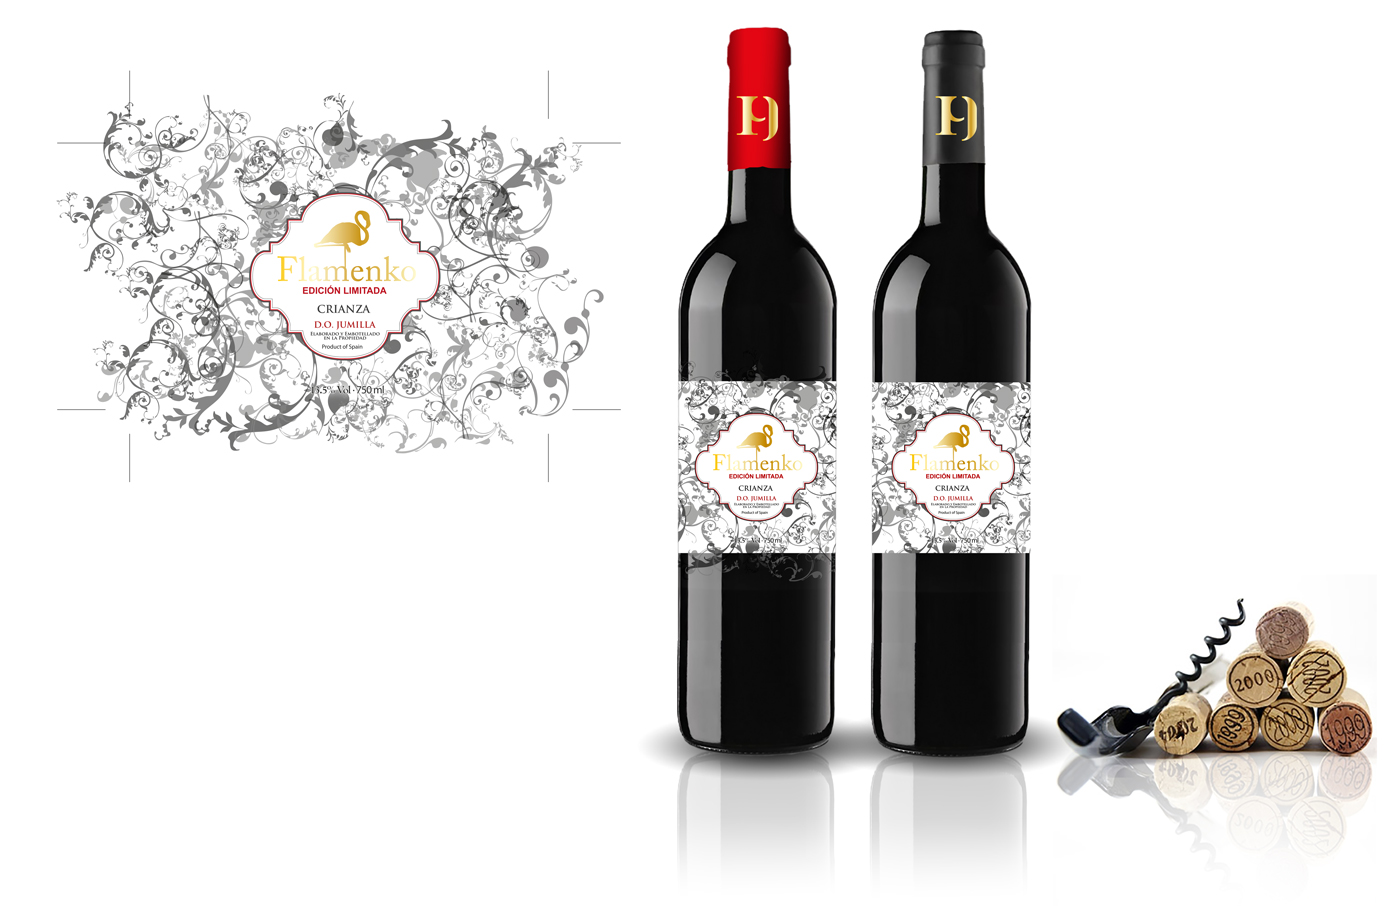 Creative graphic design portfolio of corporate logo and brand creation for wine export winery to China and Asian countries: FLAMENKO